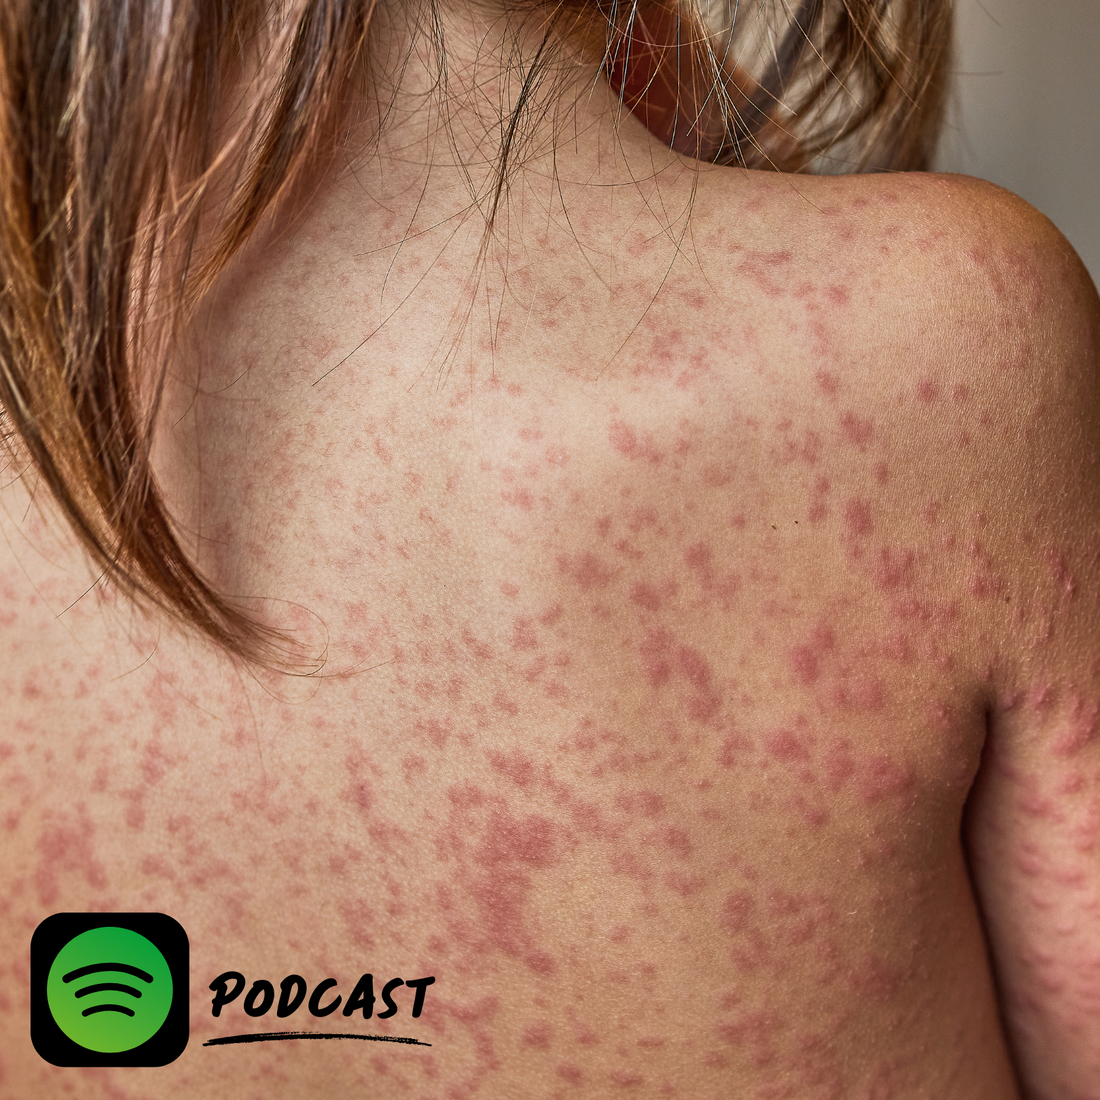 PODCAST | From Start To Finish: The Eight Stages of Psoriasis